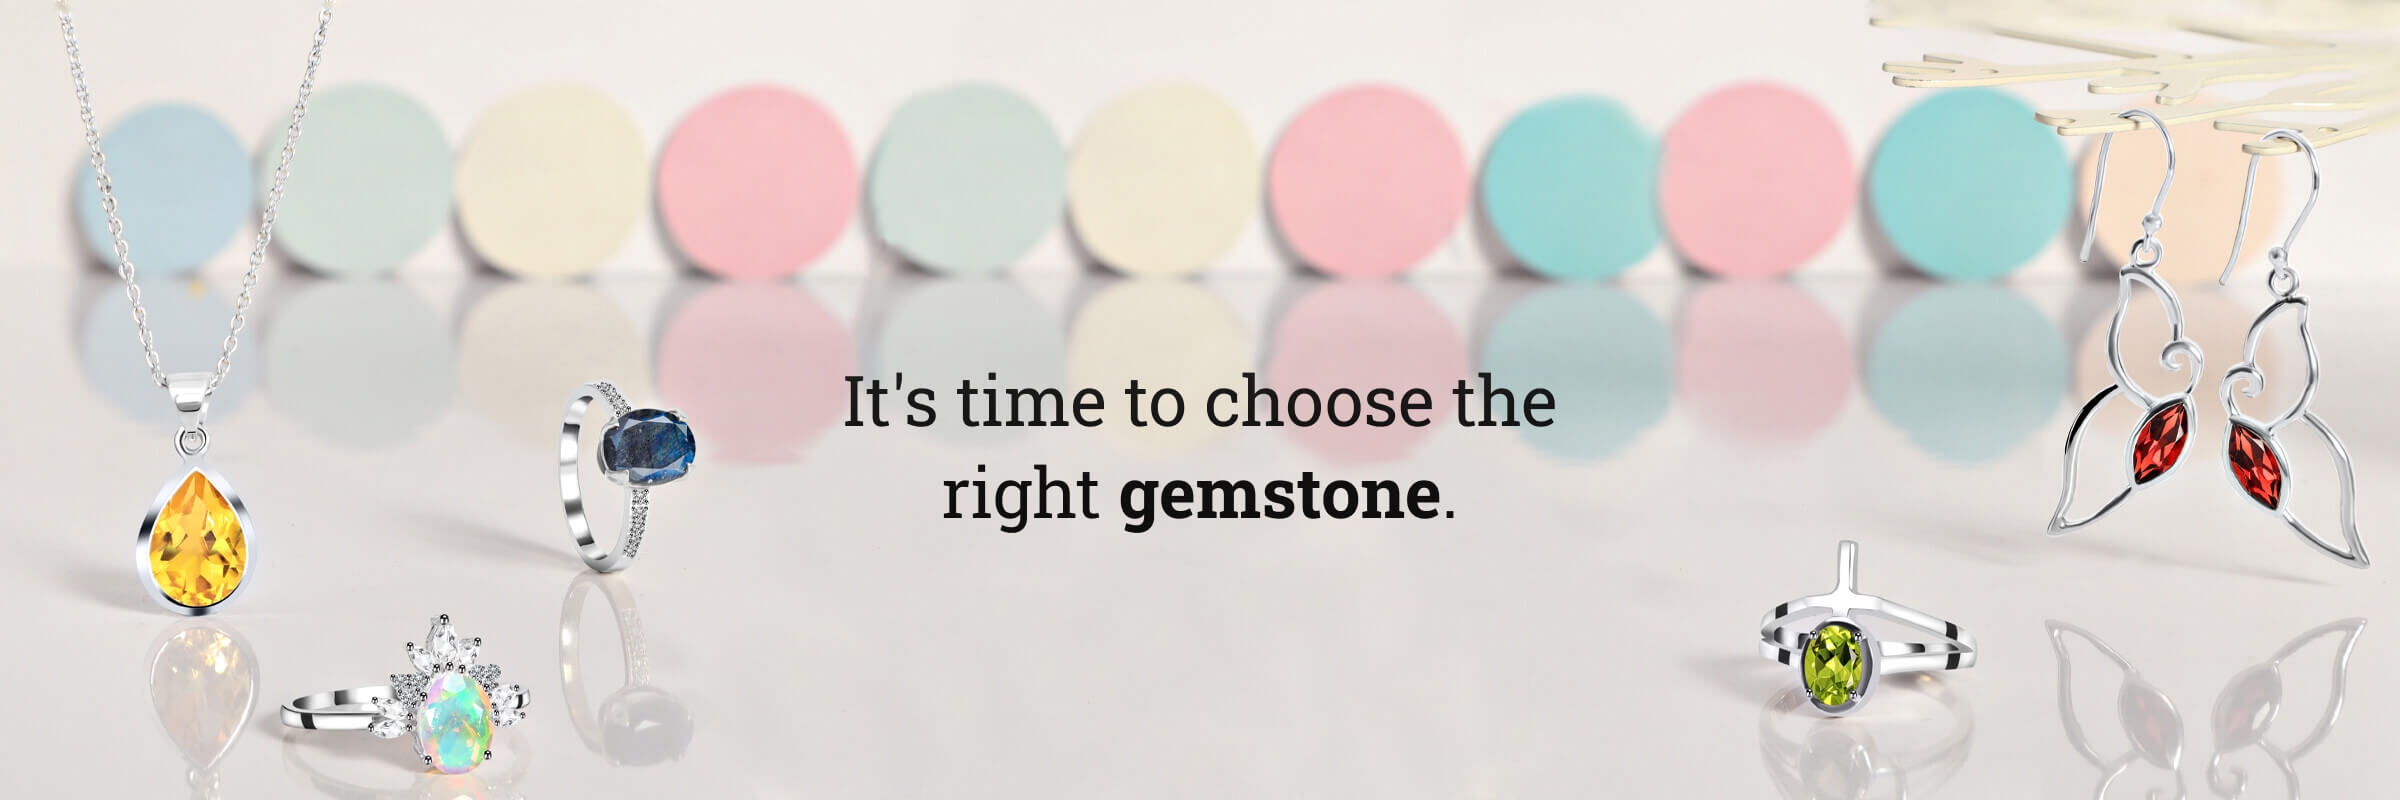 It's time to choose the right gemstone